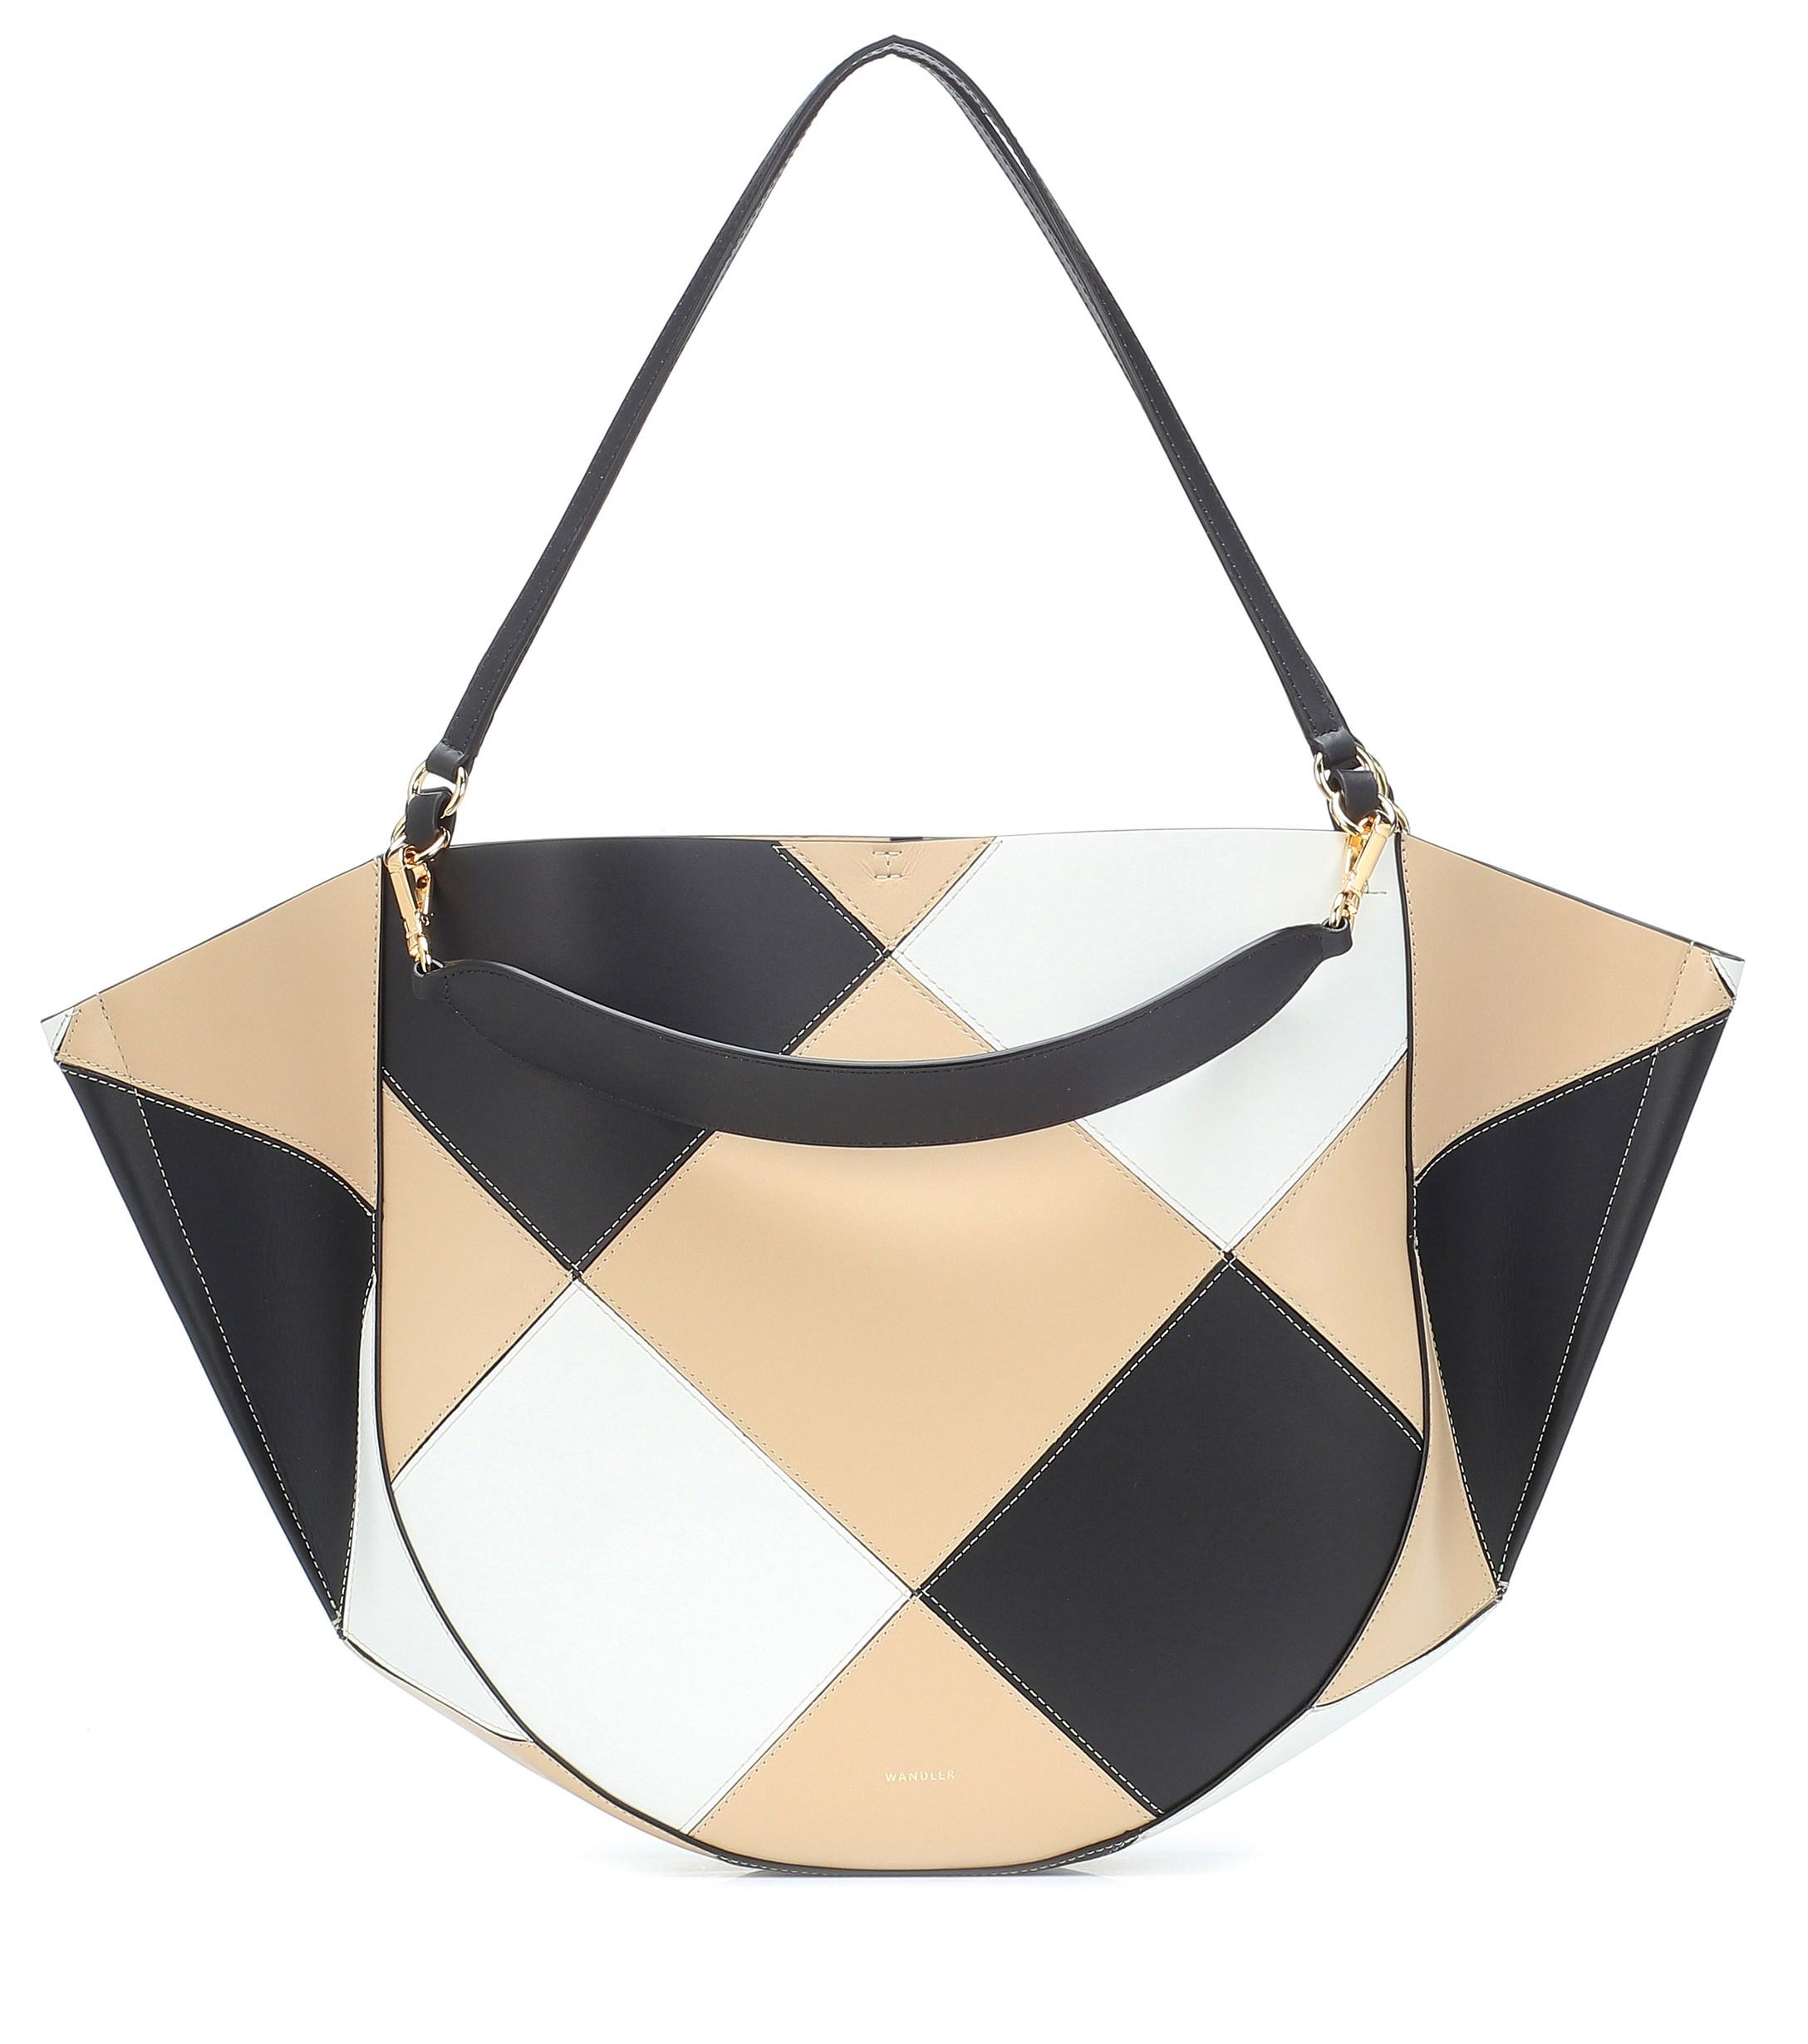 Wandler Mia Leather Tote in Black - Lyst